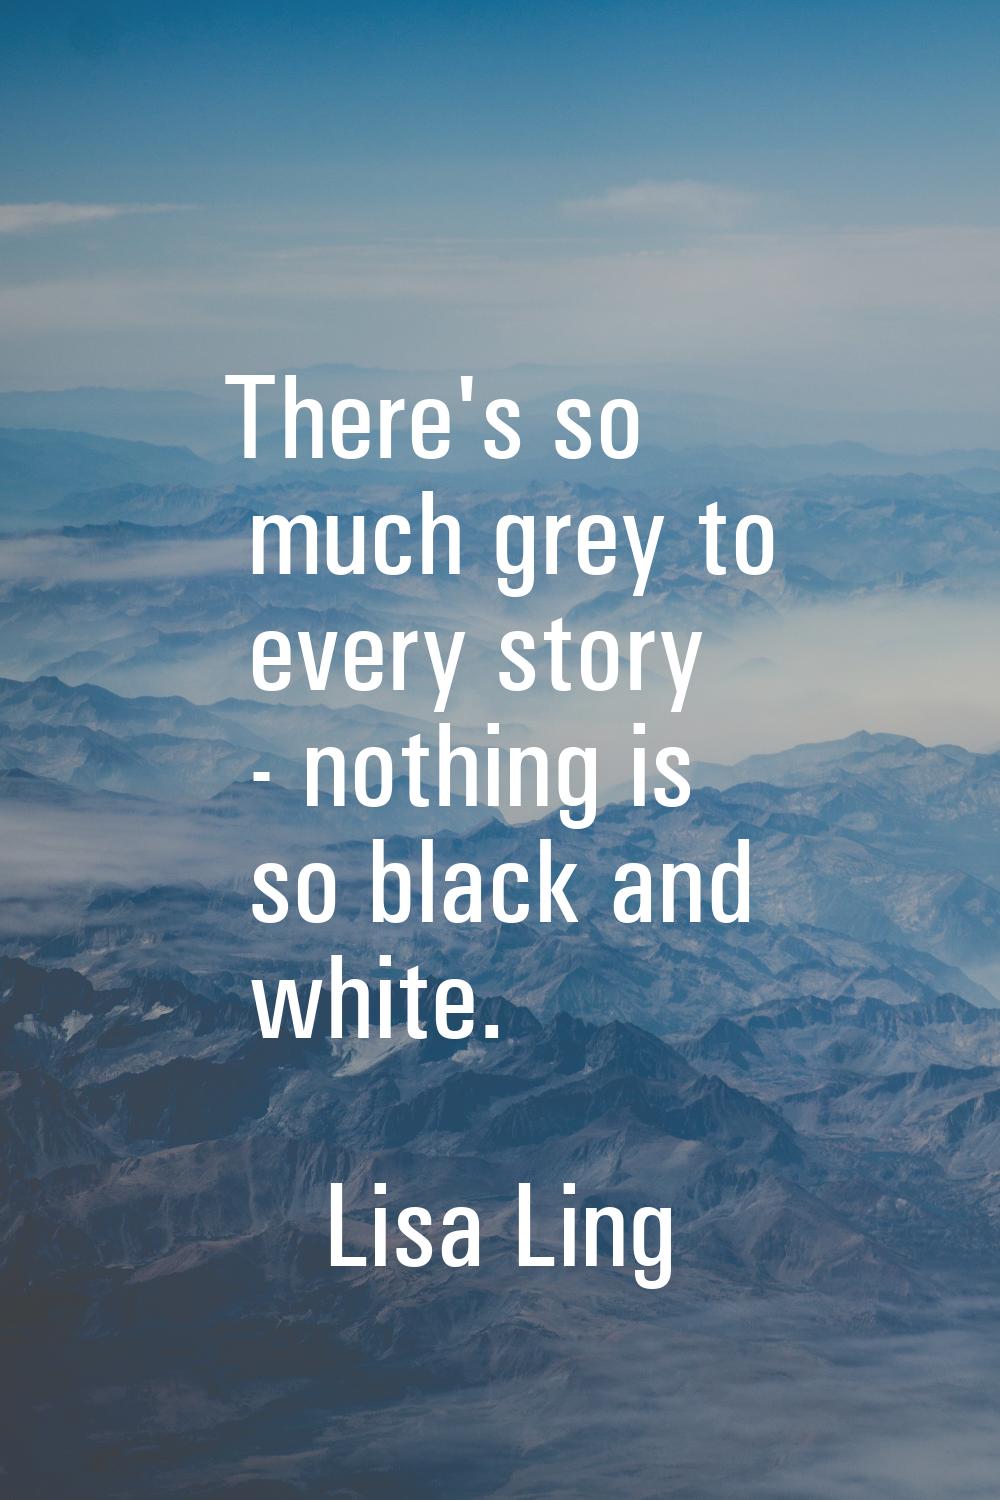 There's so much grey to every story - nothing is so black and white.